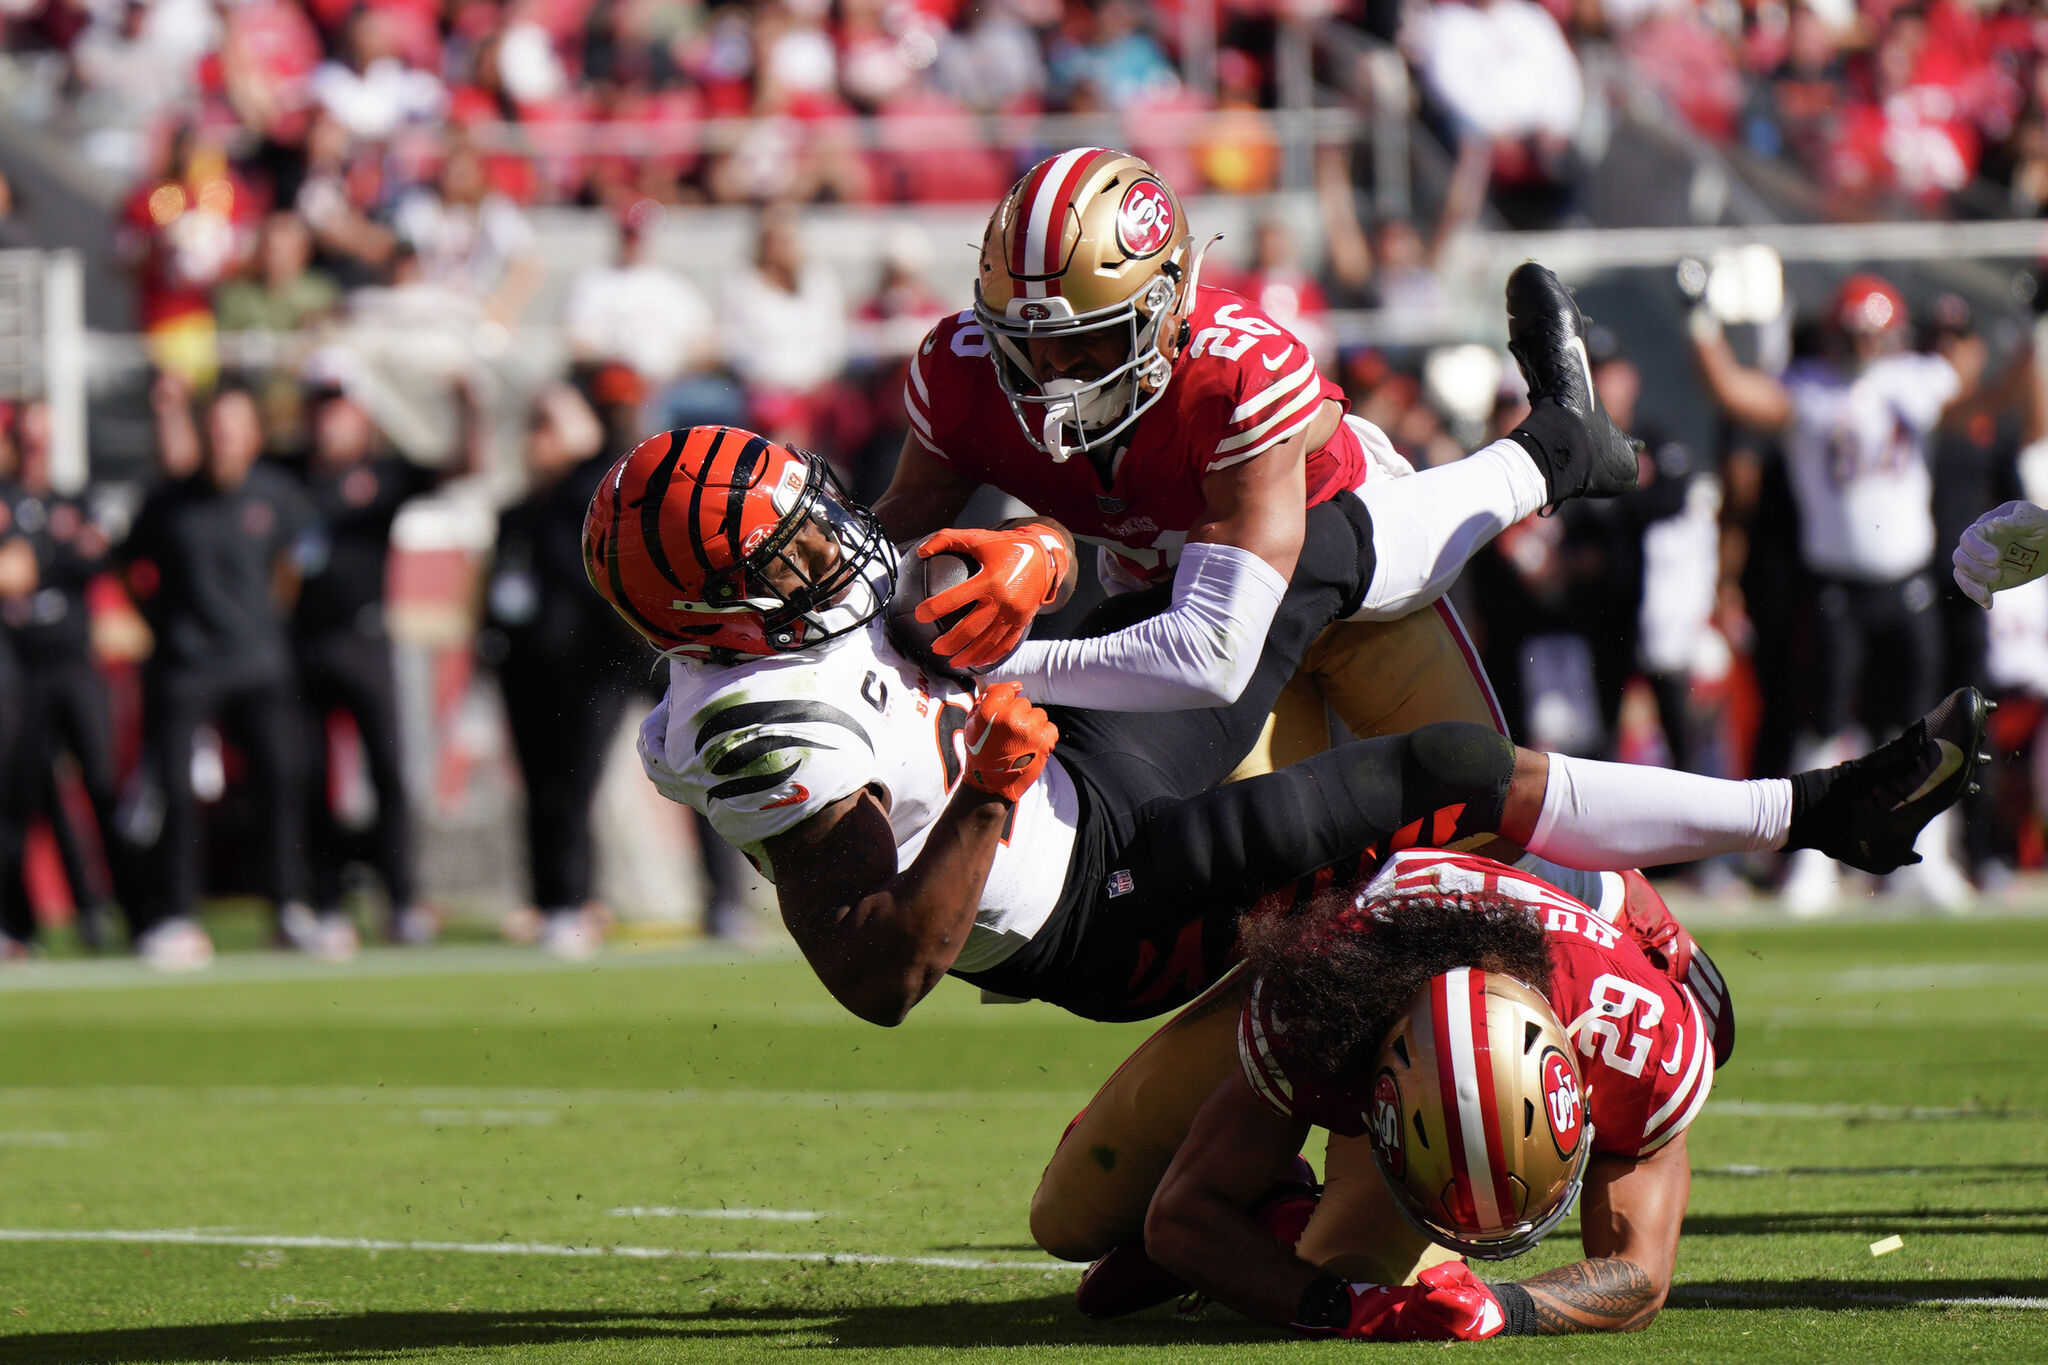 NFL broadcasters seem to finally realize 49ers no longer play in SF